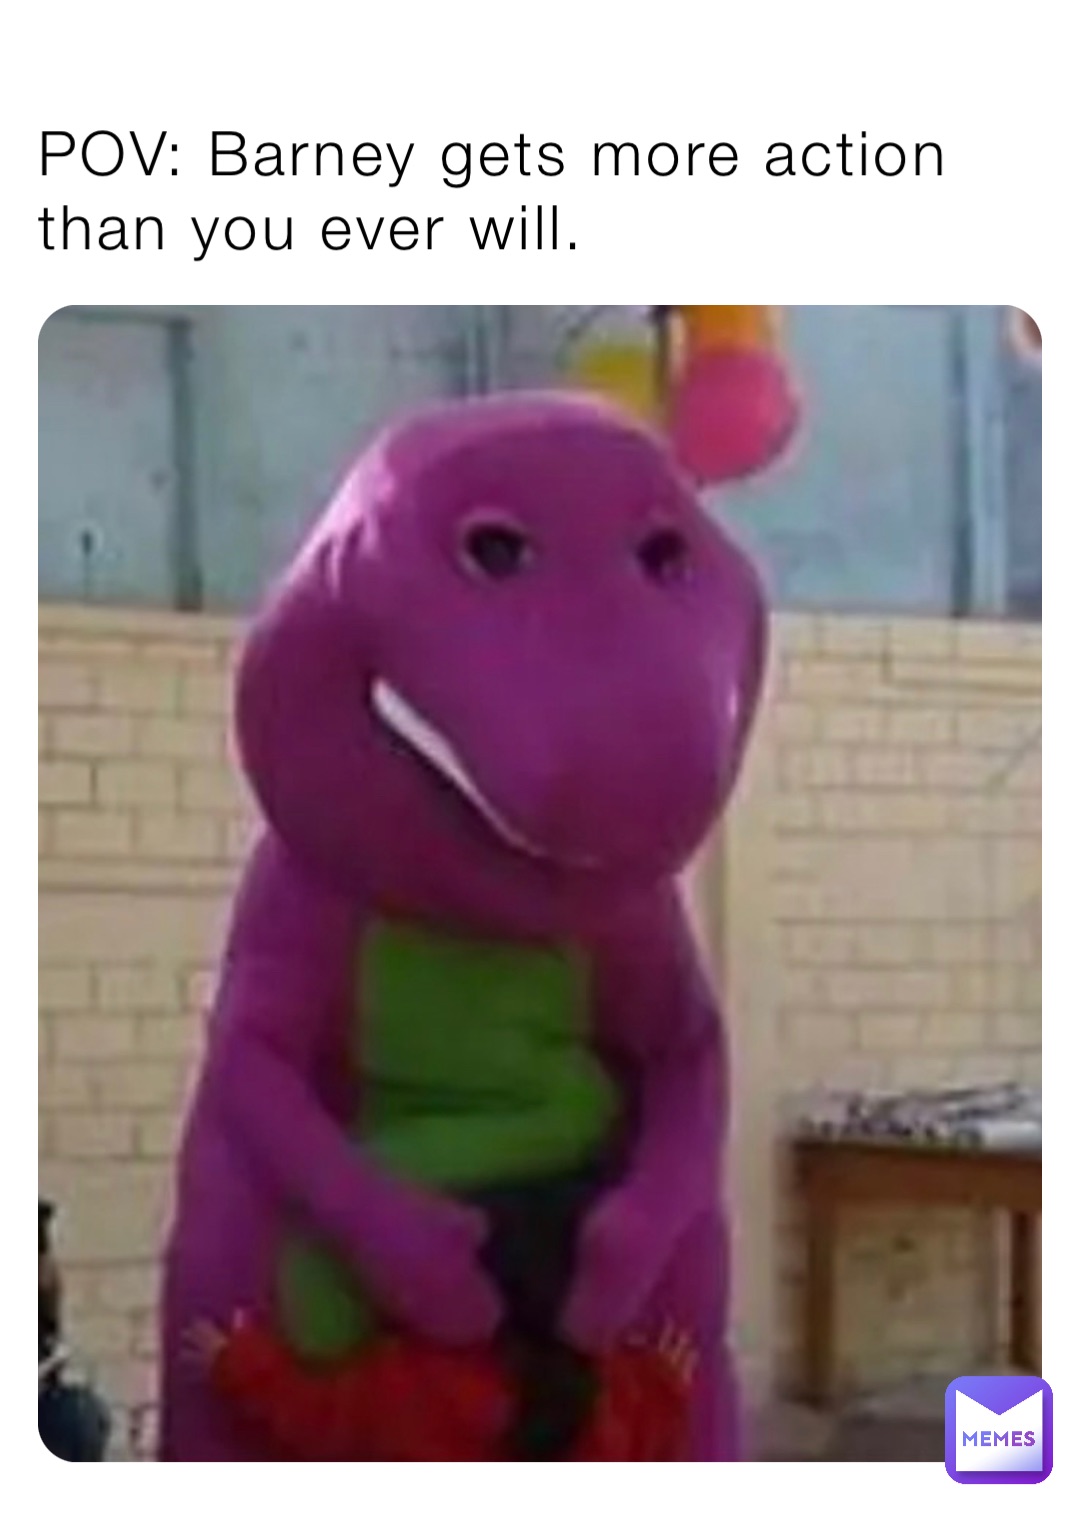 POV: Barney gets more action than you ever will.